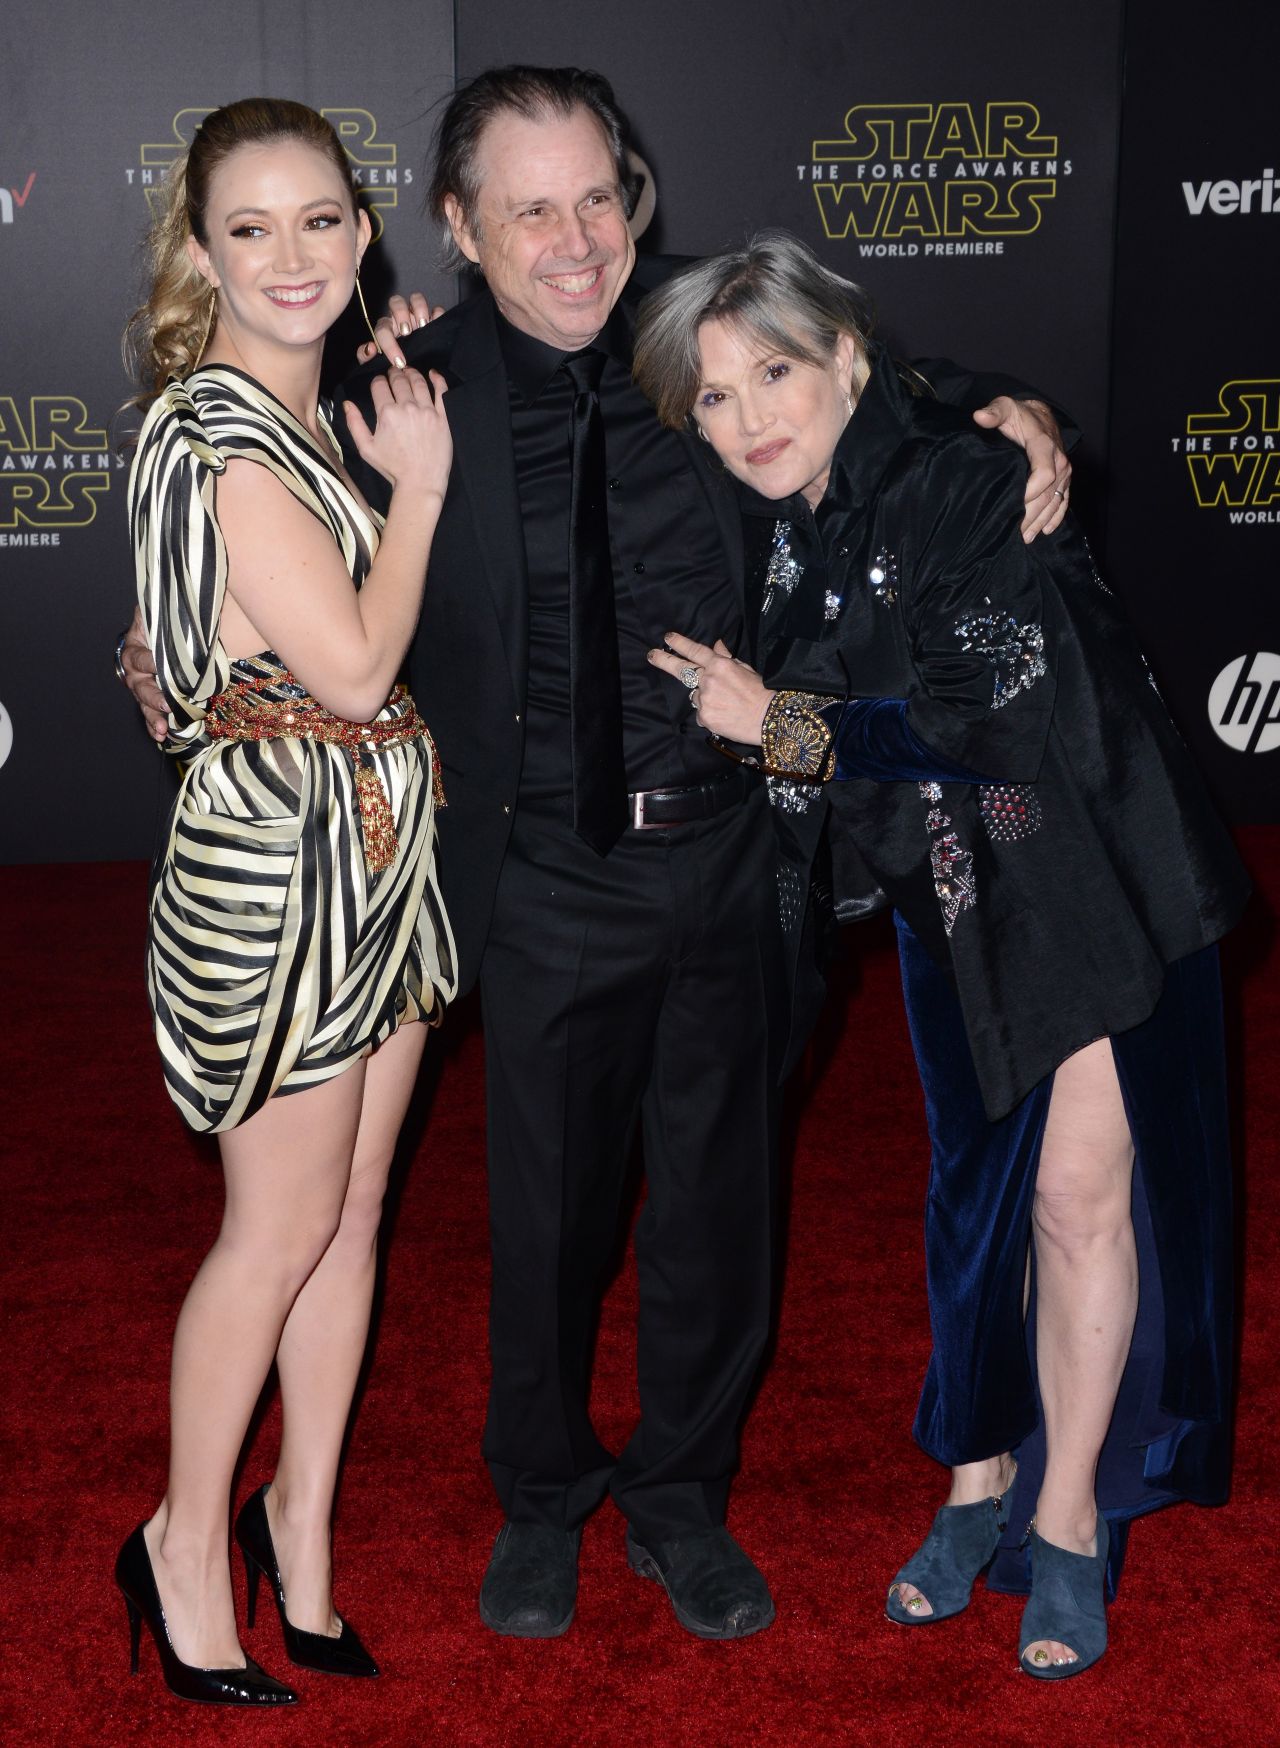 Billie Lourd – Star Wars: The Force Awakens Premiere in Hollywood1280 x 1748